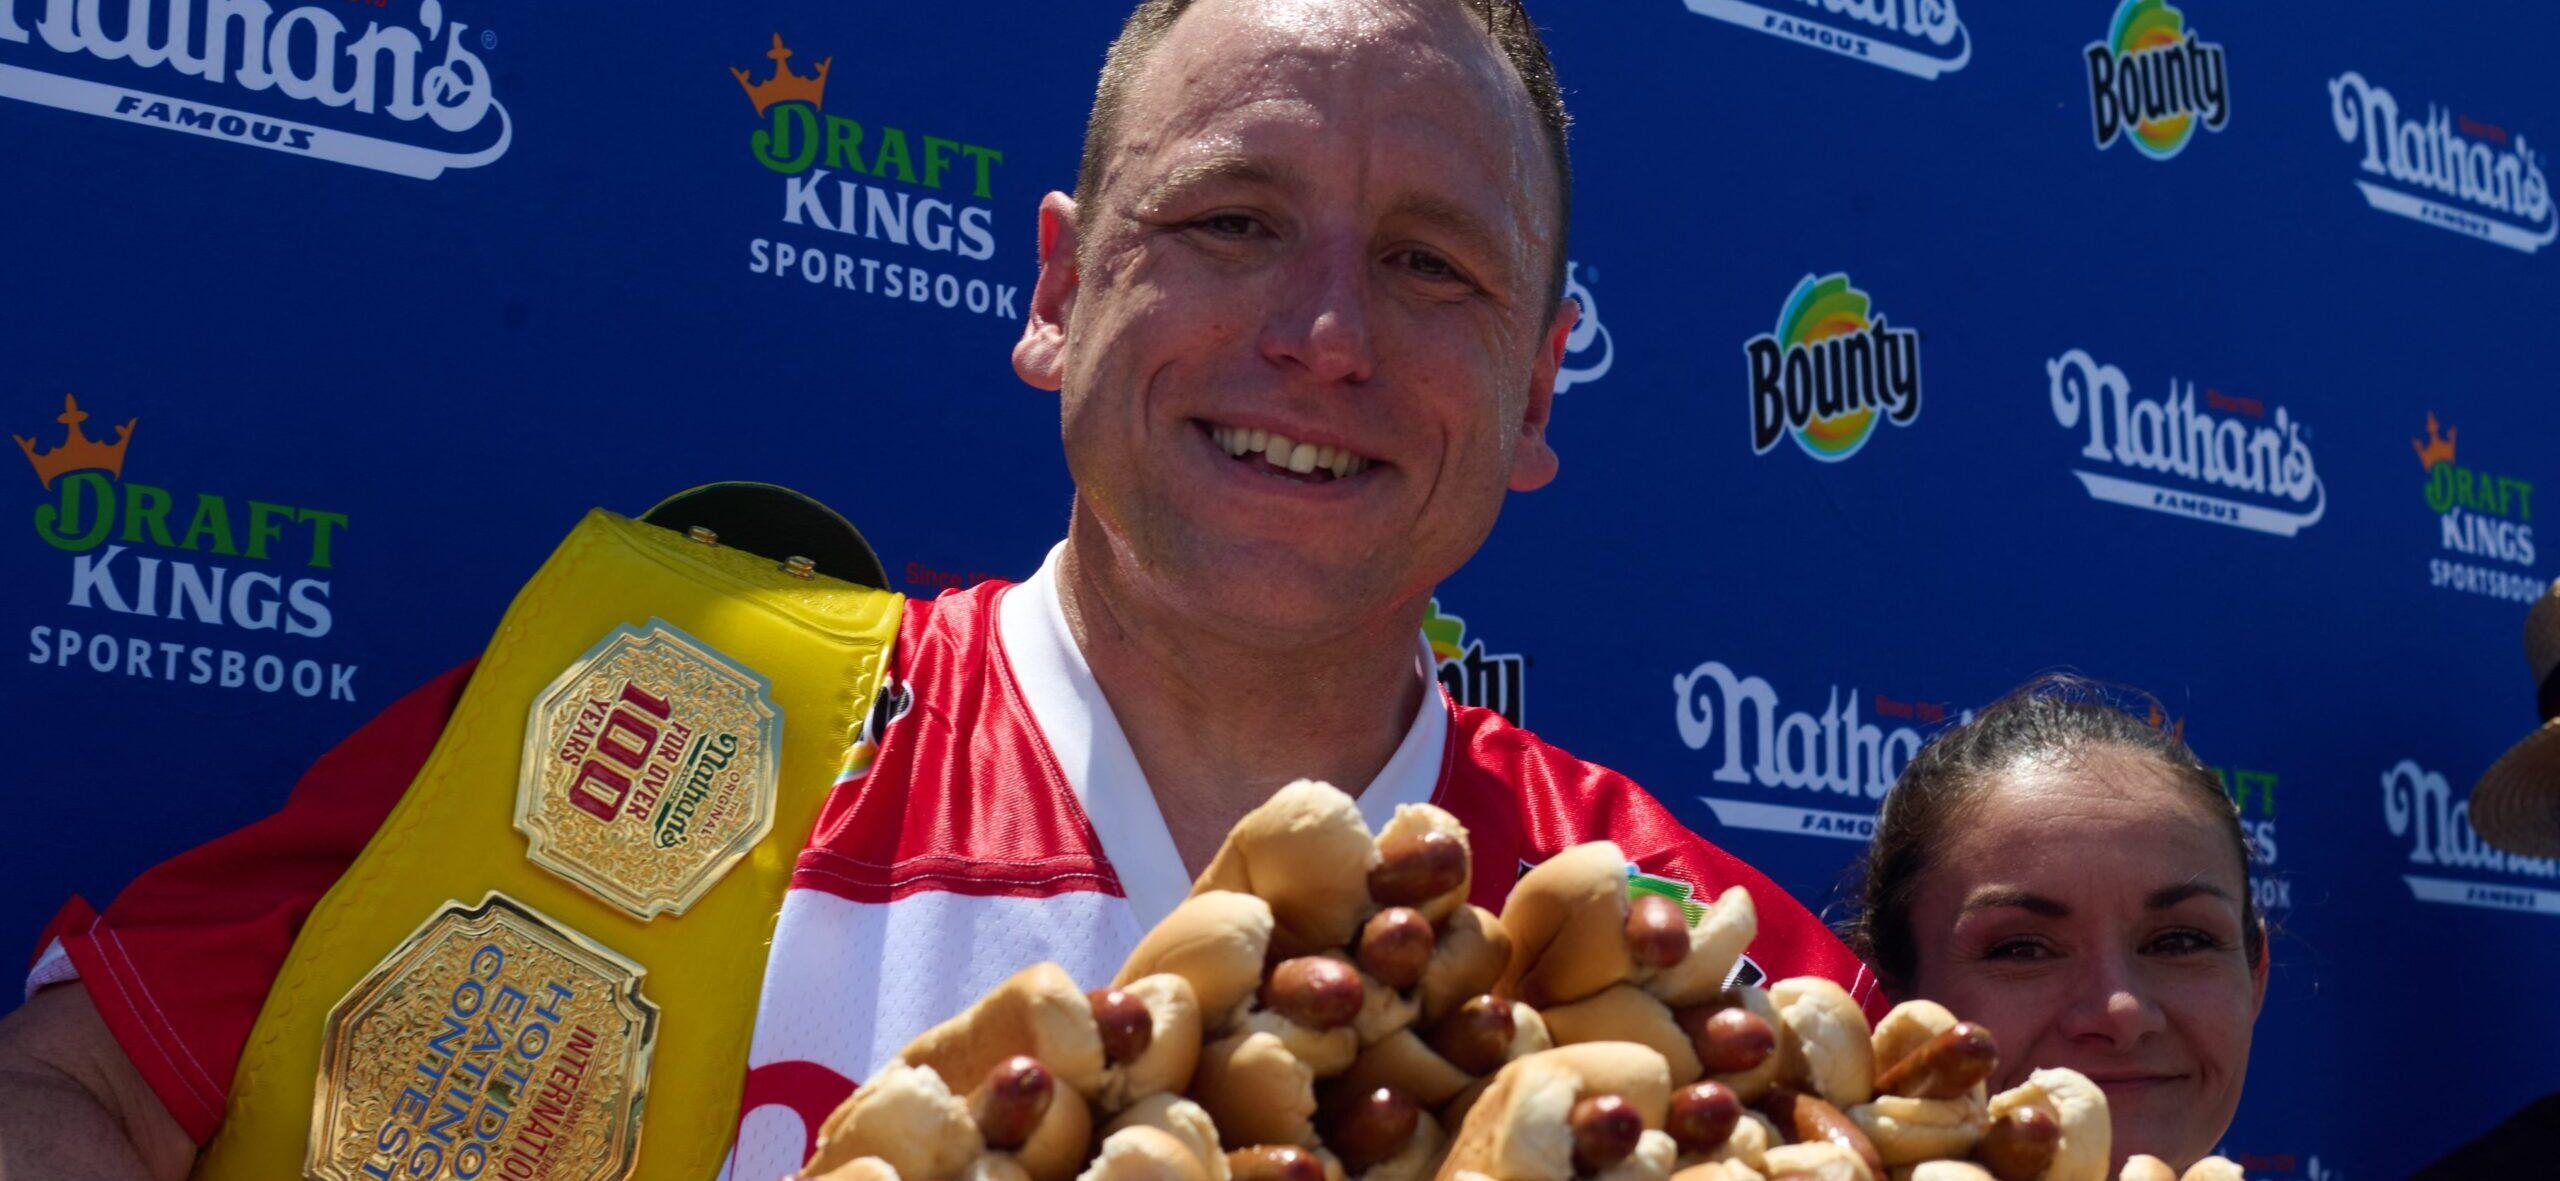 Joey Chestnut wins Nathans Hot Dog Eating Contest 2021